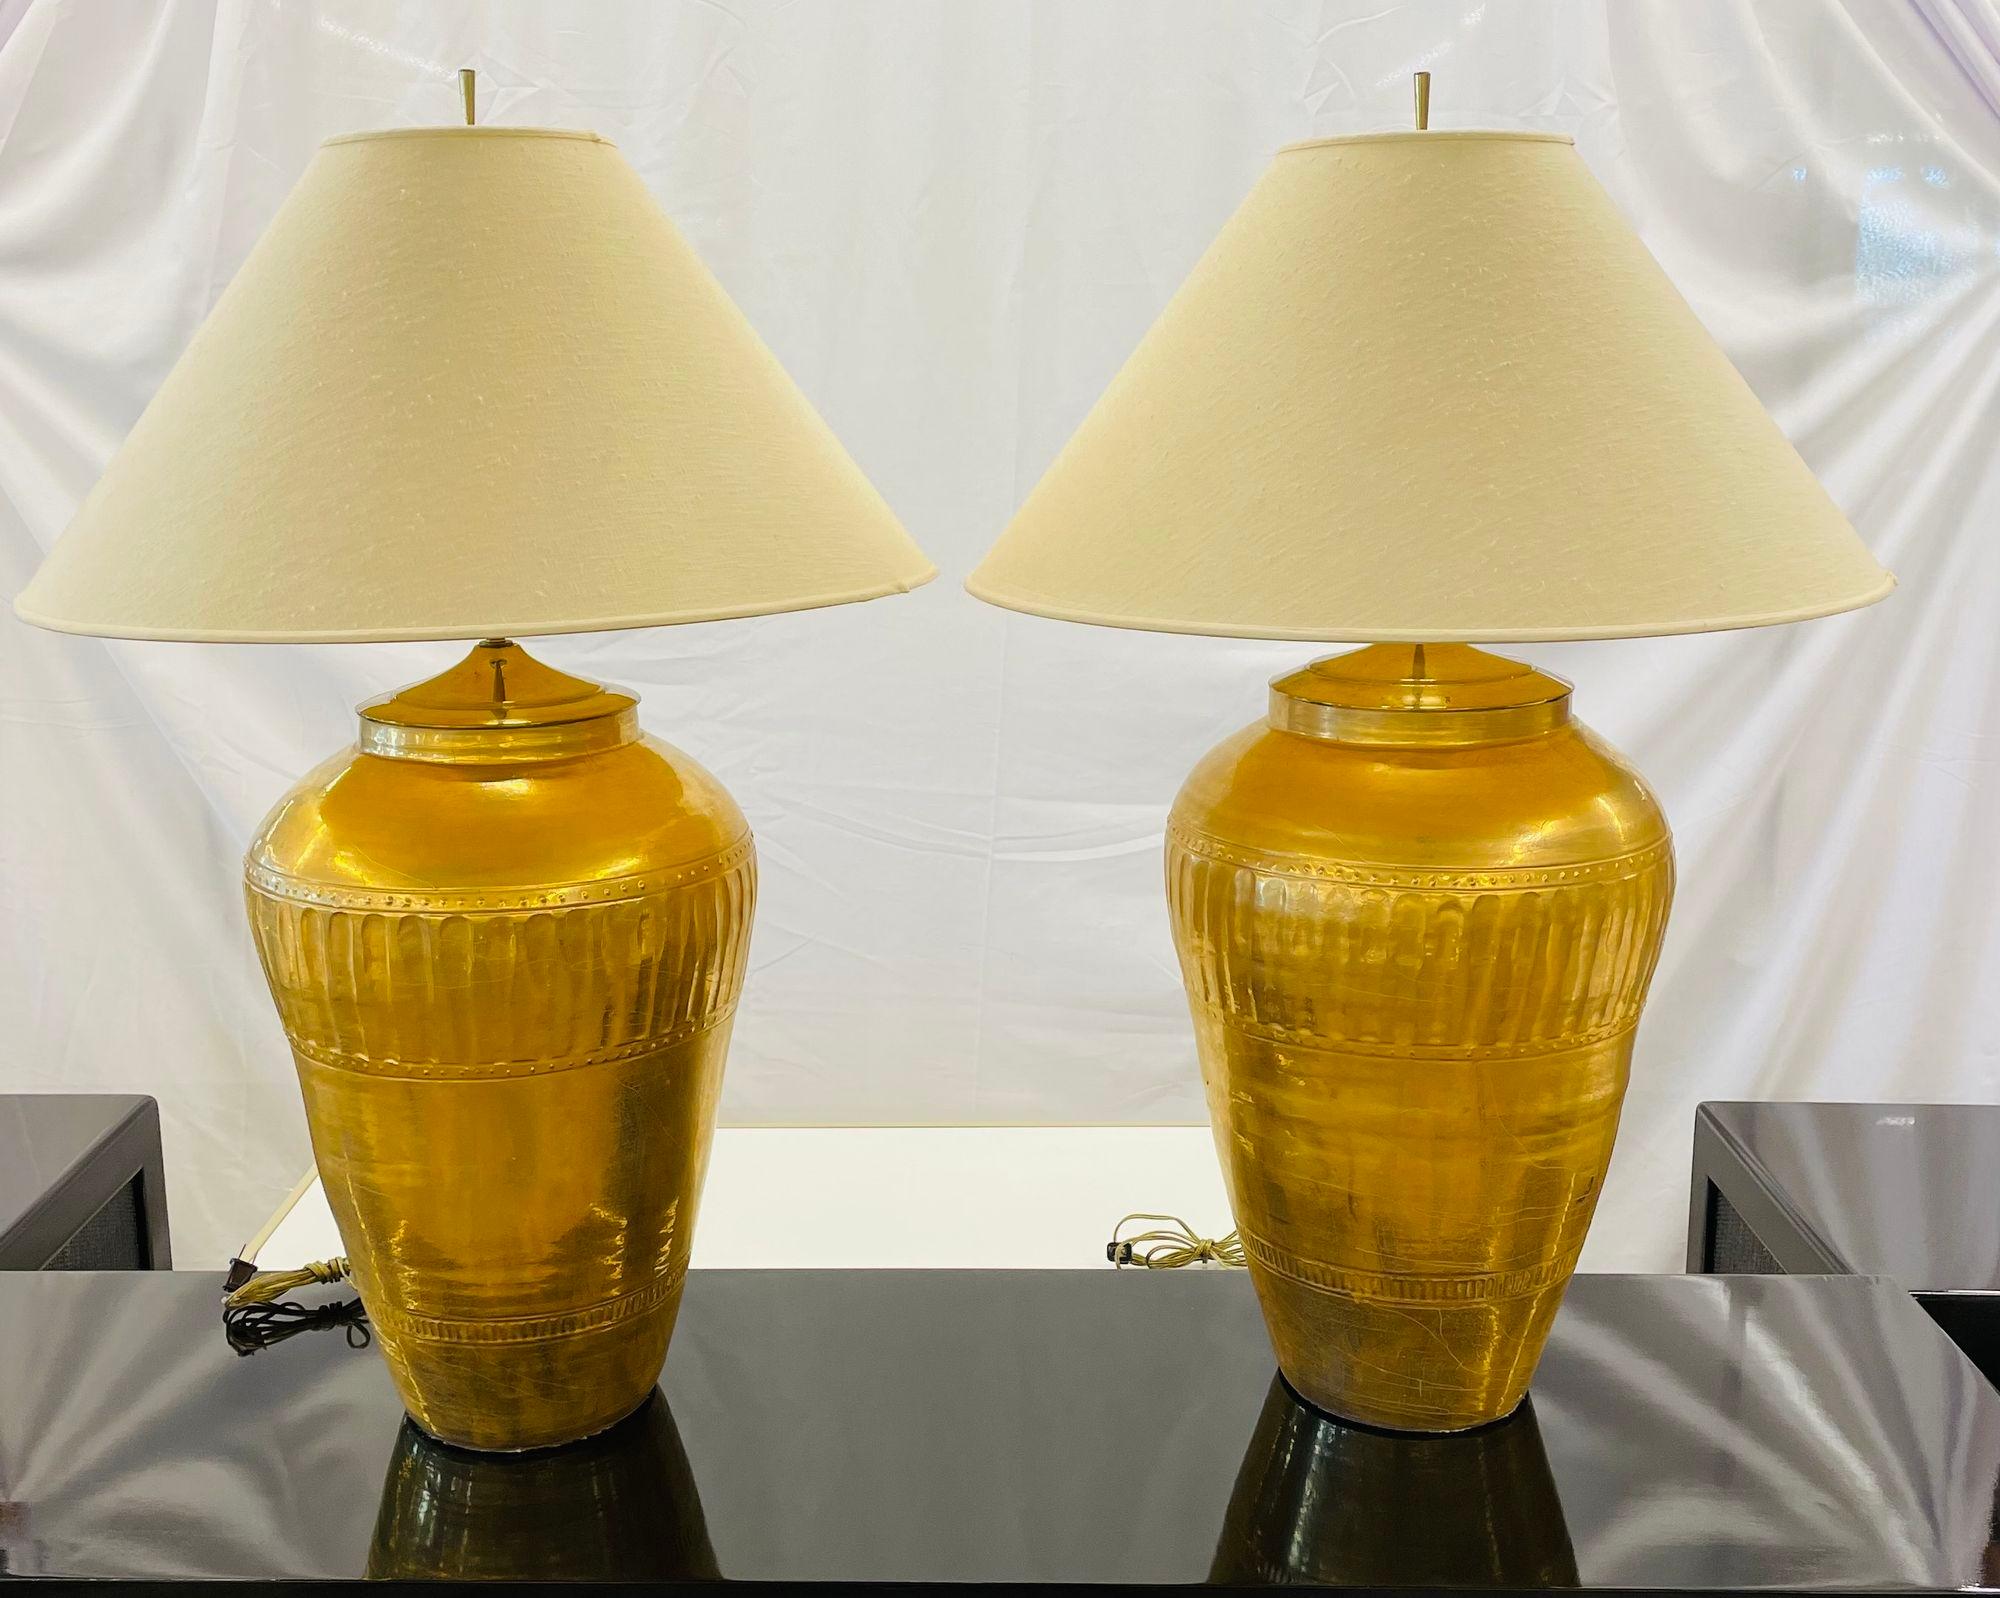 Palatial Pair of Gilt Metal Urn Form Table Lamps, Hollywood Regency
 
A Monumental Pair of Table Lamps having a Ginger Jar Form in a fine Water Gilt Crackleware Metal each having two newly wired lights. The pair with custom Linen Lamp Shades. These